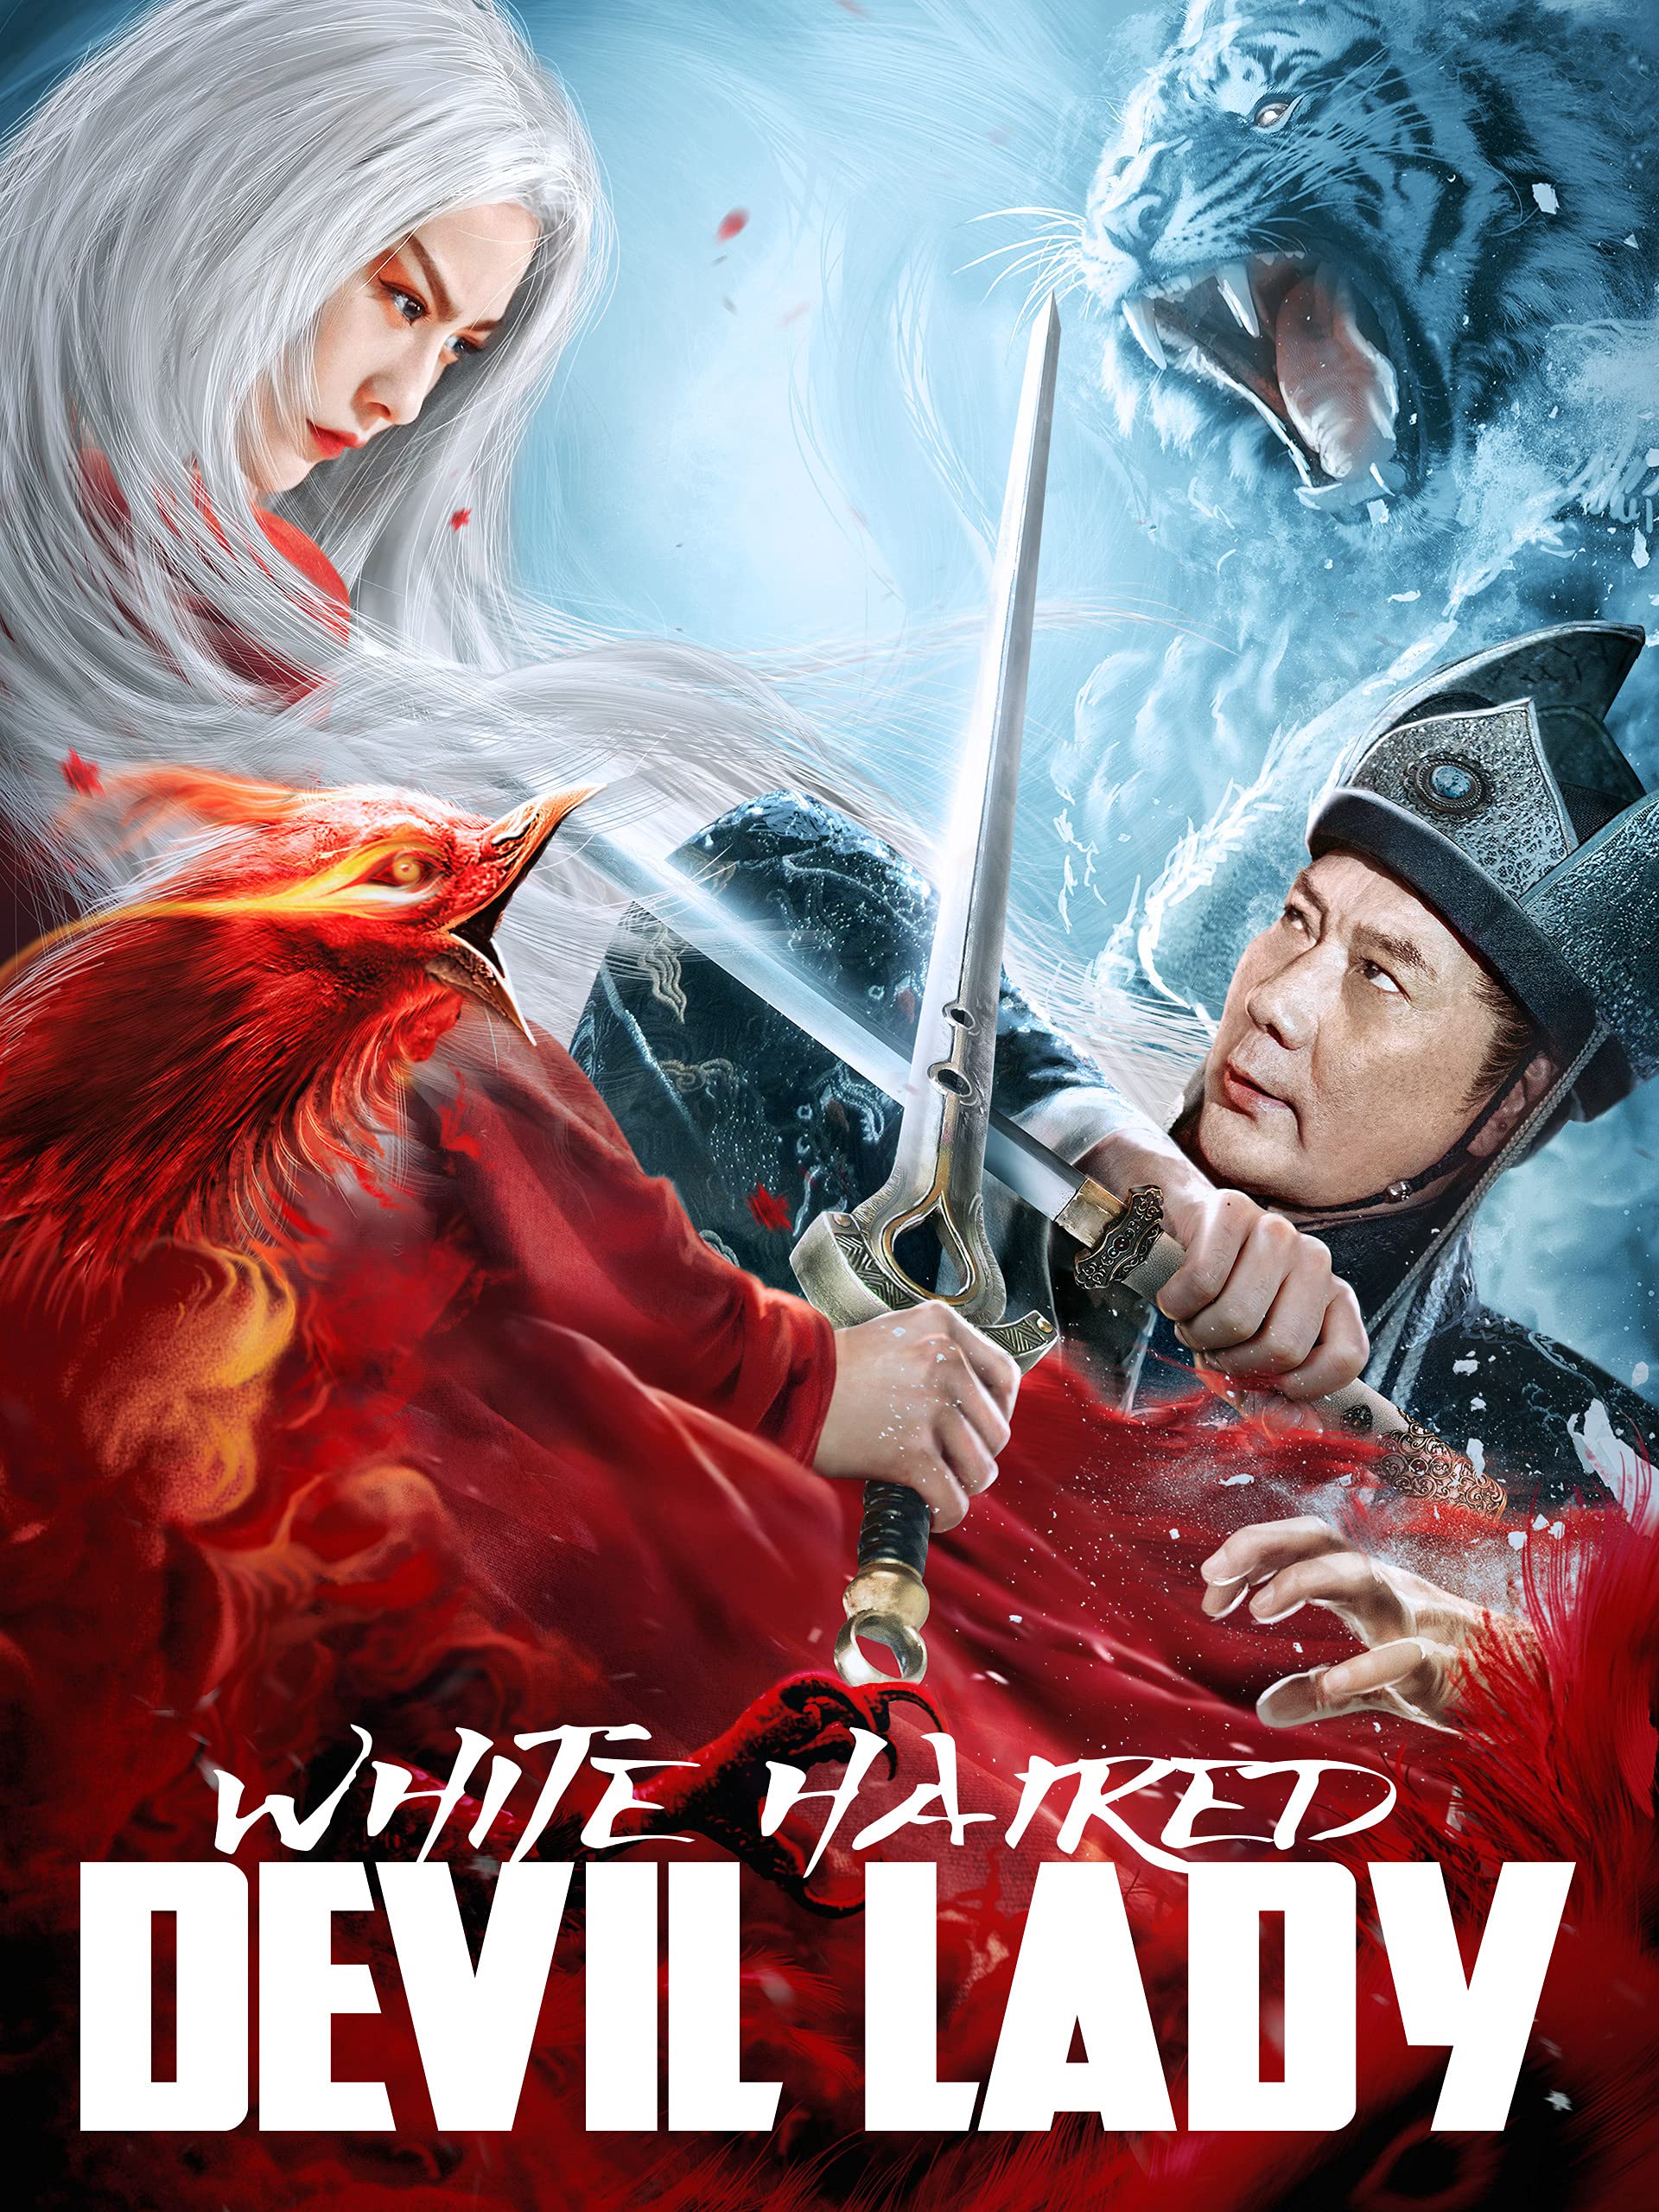 Download White Haired Devil Lady 2020 Hindi ORG Dual Audio 480p HDRip 300MB